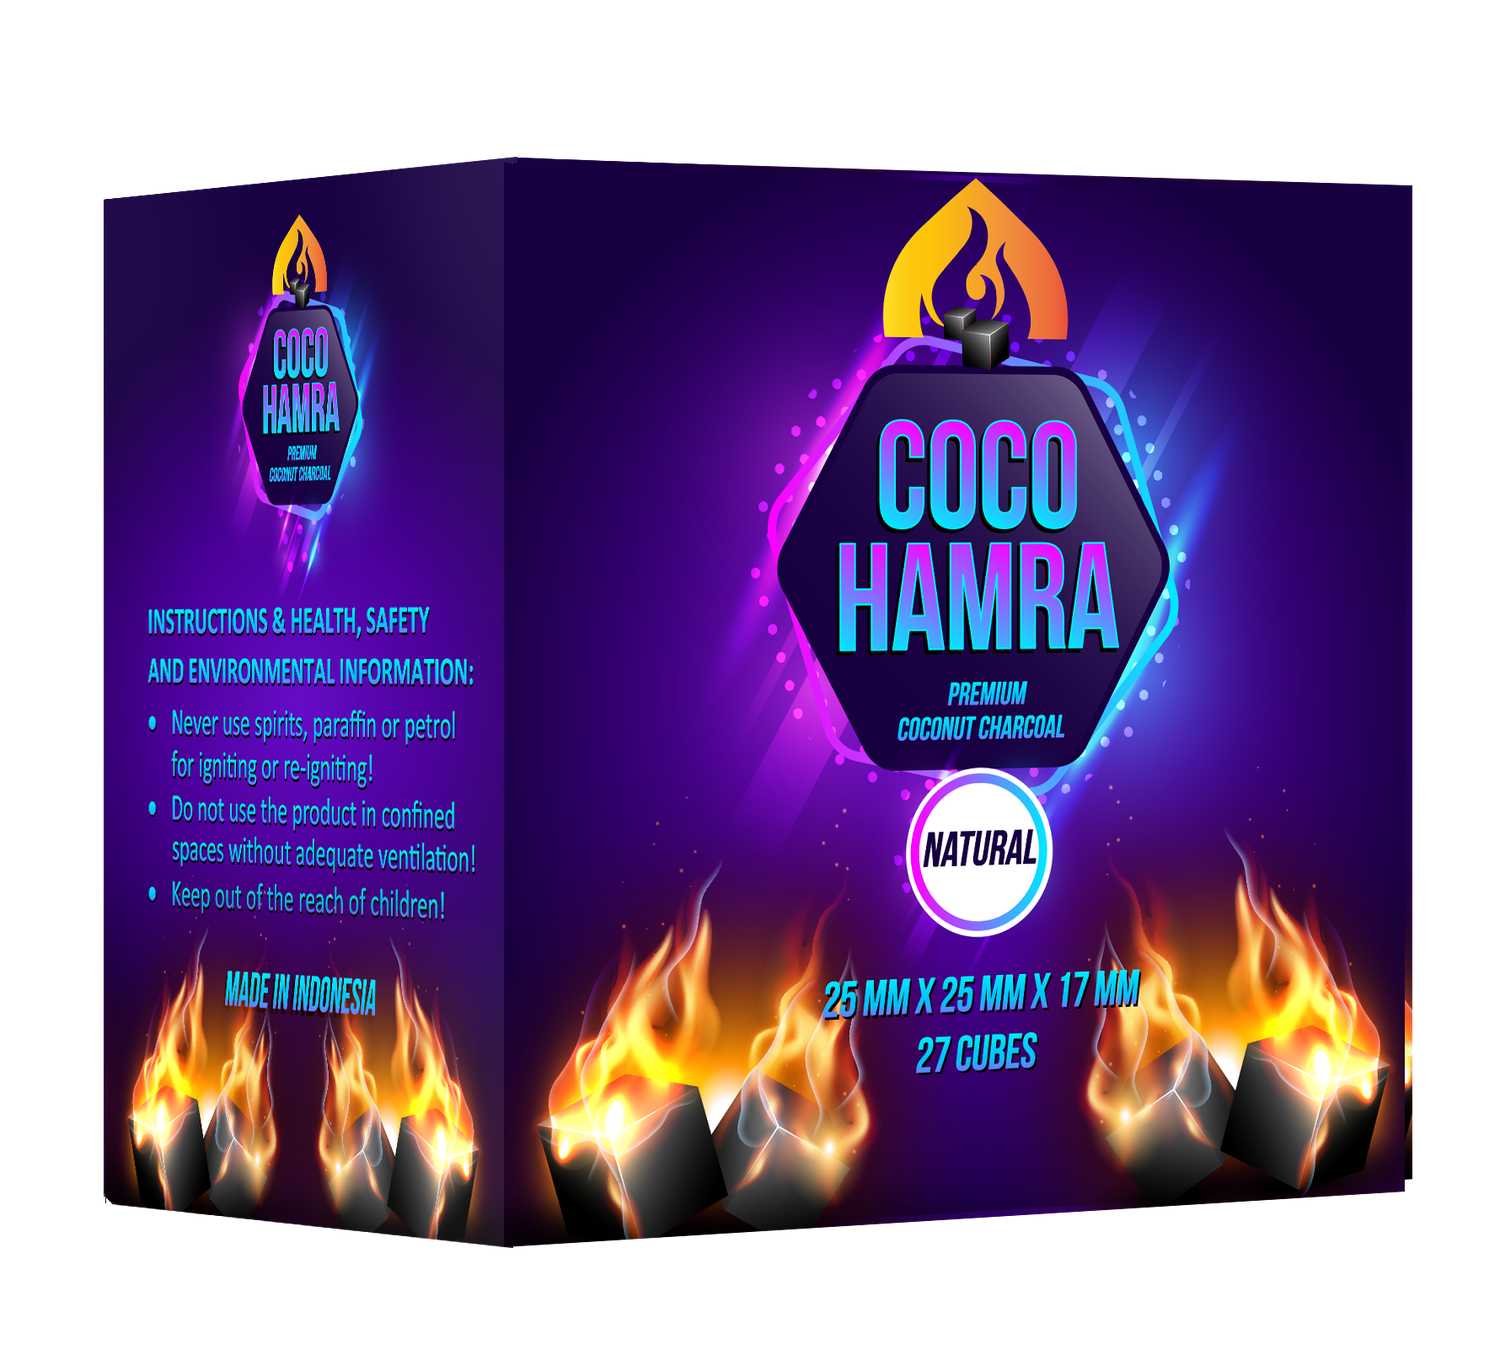 Coco Hamra 27 Small Cubes 40 Boxes 10kG Lounge Package ( Master case )